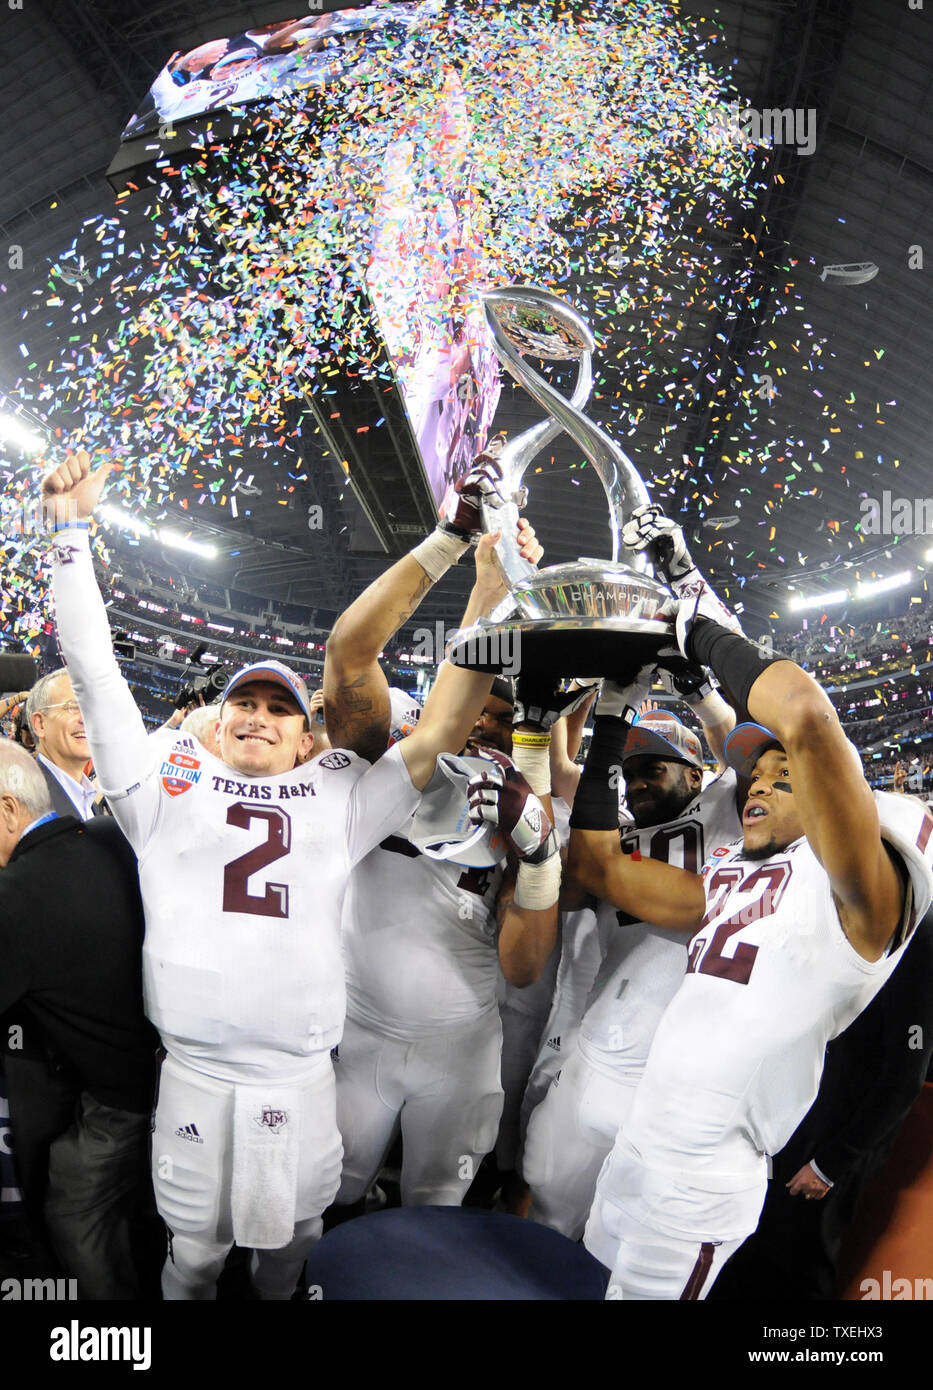 Texas A&M Aggies Johnny Manziel, left and teammates lift the Field Scovell Trophy after beating the Oklahoma Sooners 41-13in the 77th AT&T Cotton Bowl Classic at Cowboys Stadium in Arlington, Texas on January 4, 2013  UPI/Ian Halperin Stock Photo